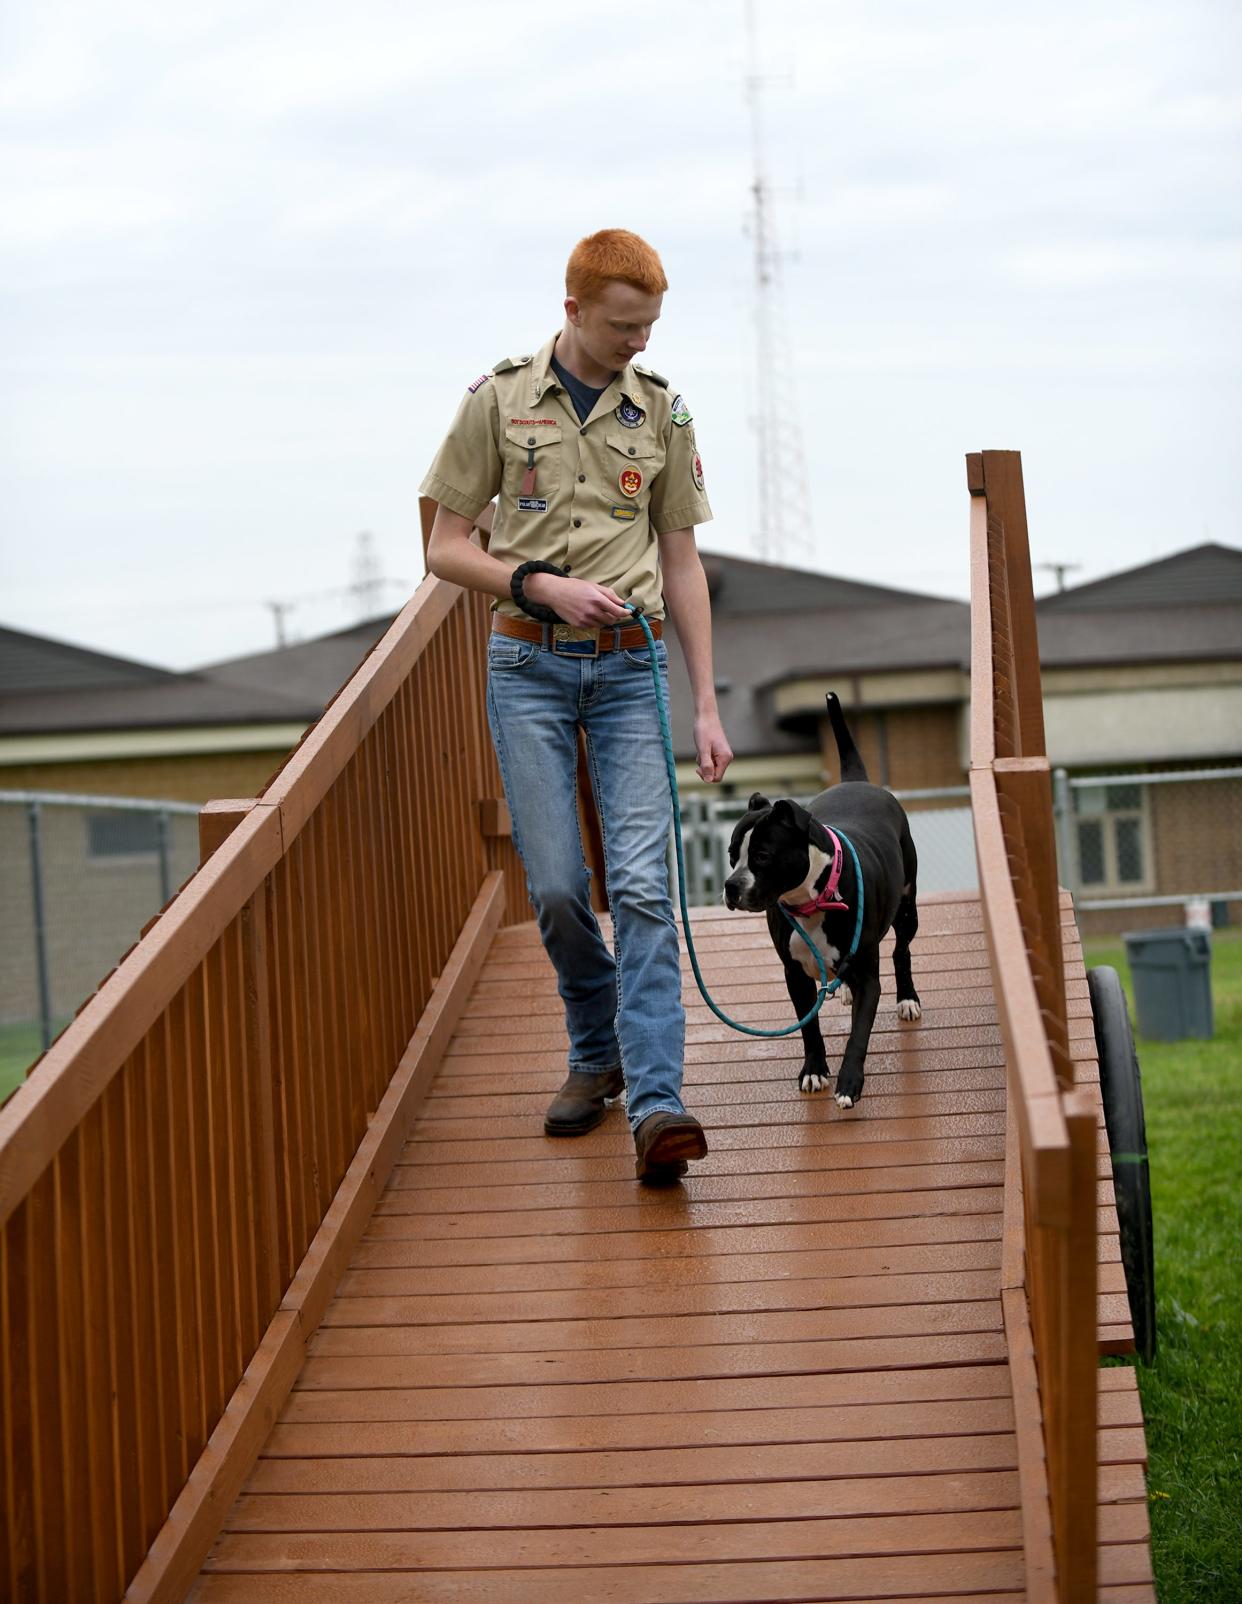 GlenOak sophomore Jacob Price, shown with rescue dog Baby Girl, has spent the last two years planning, designing and building a dog agility course for the Stark County Humane Society for his Eagle Scout project.